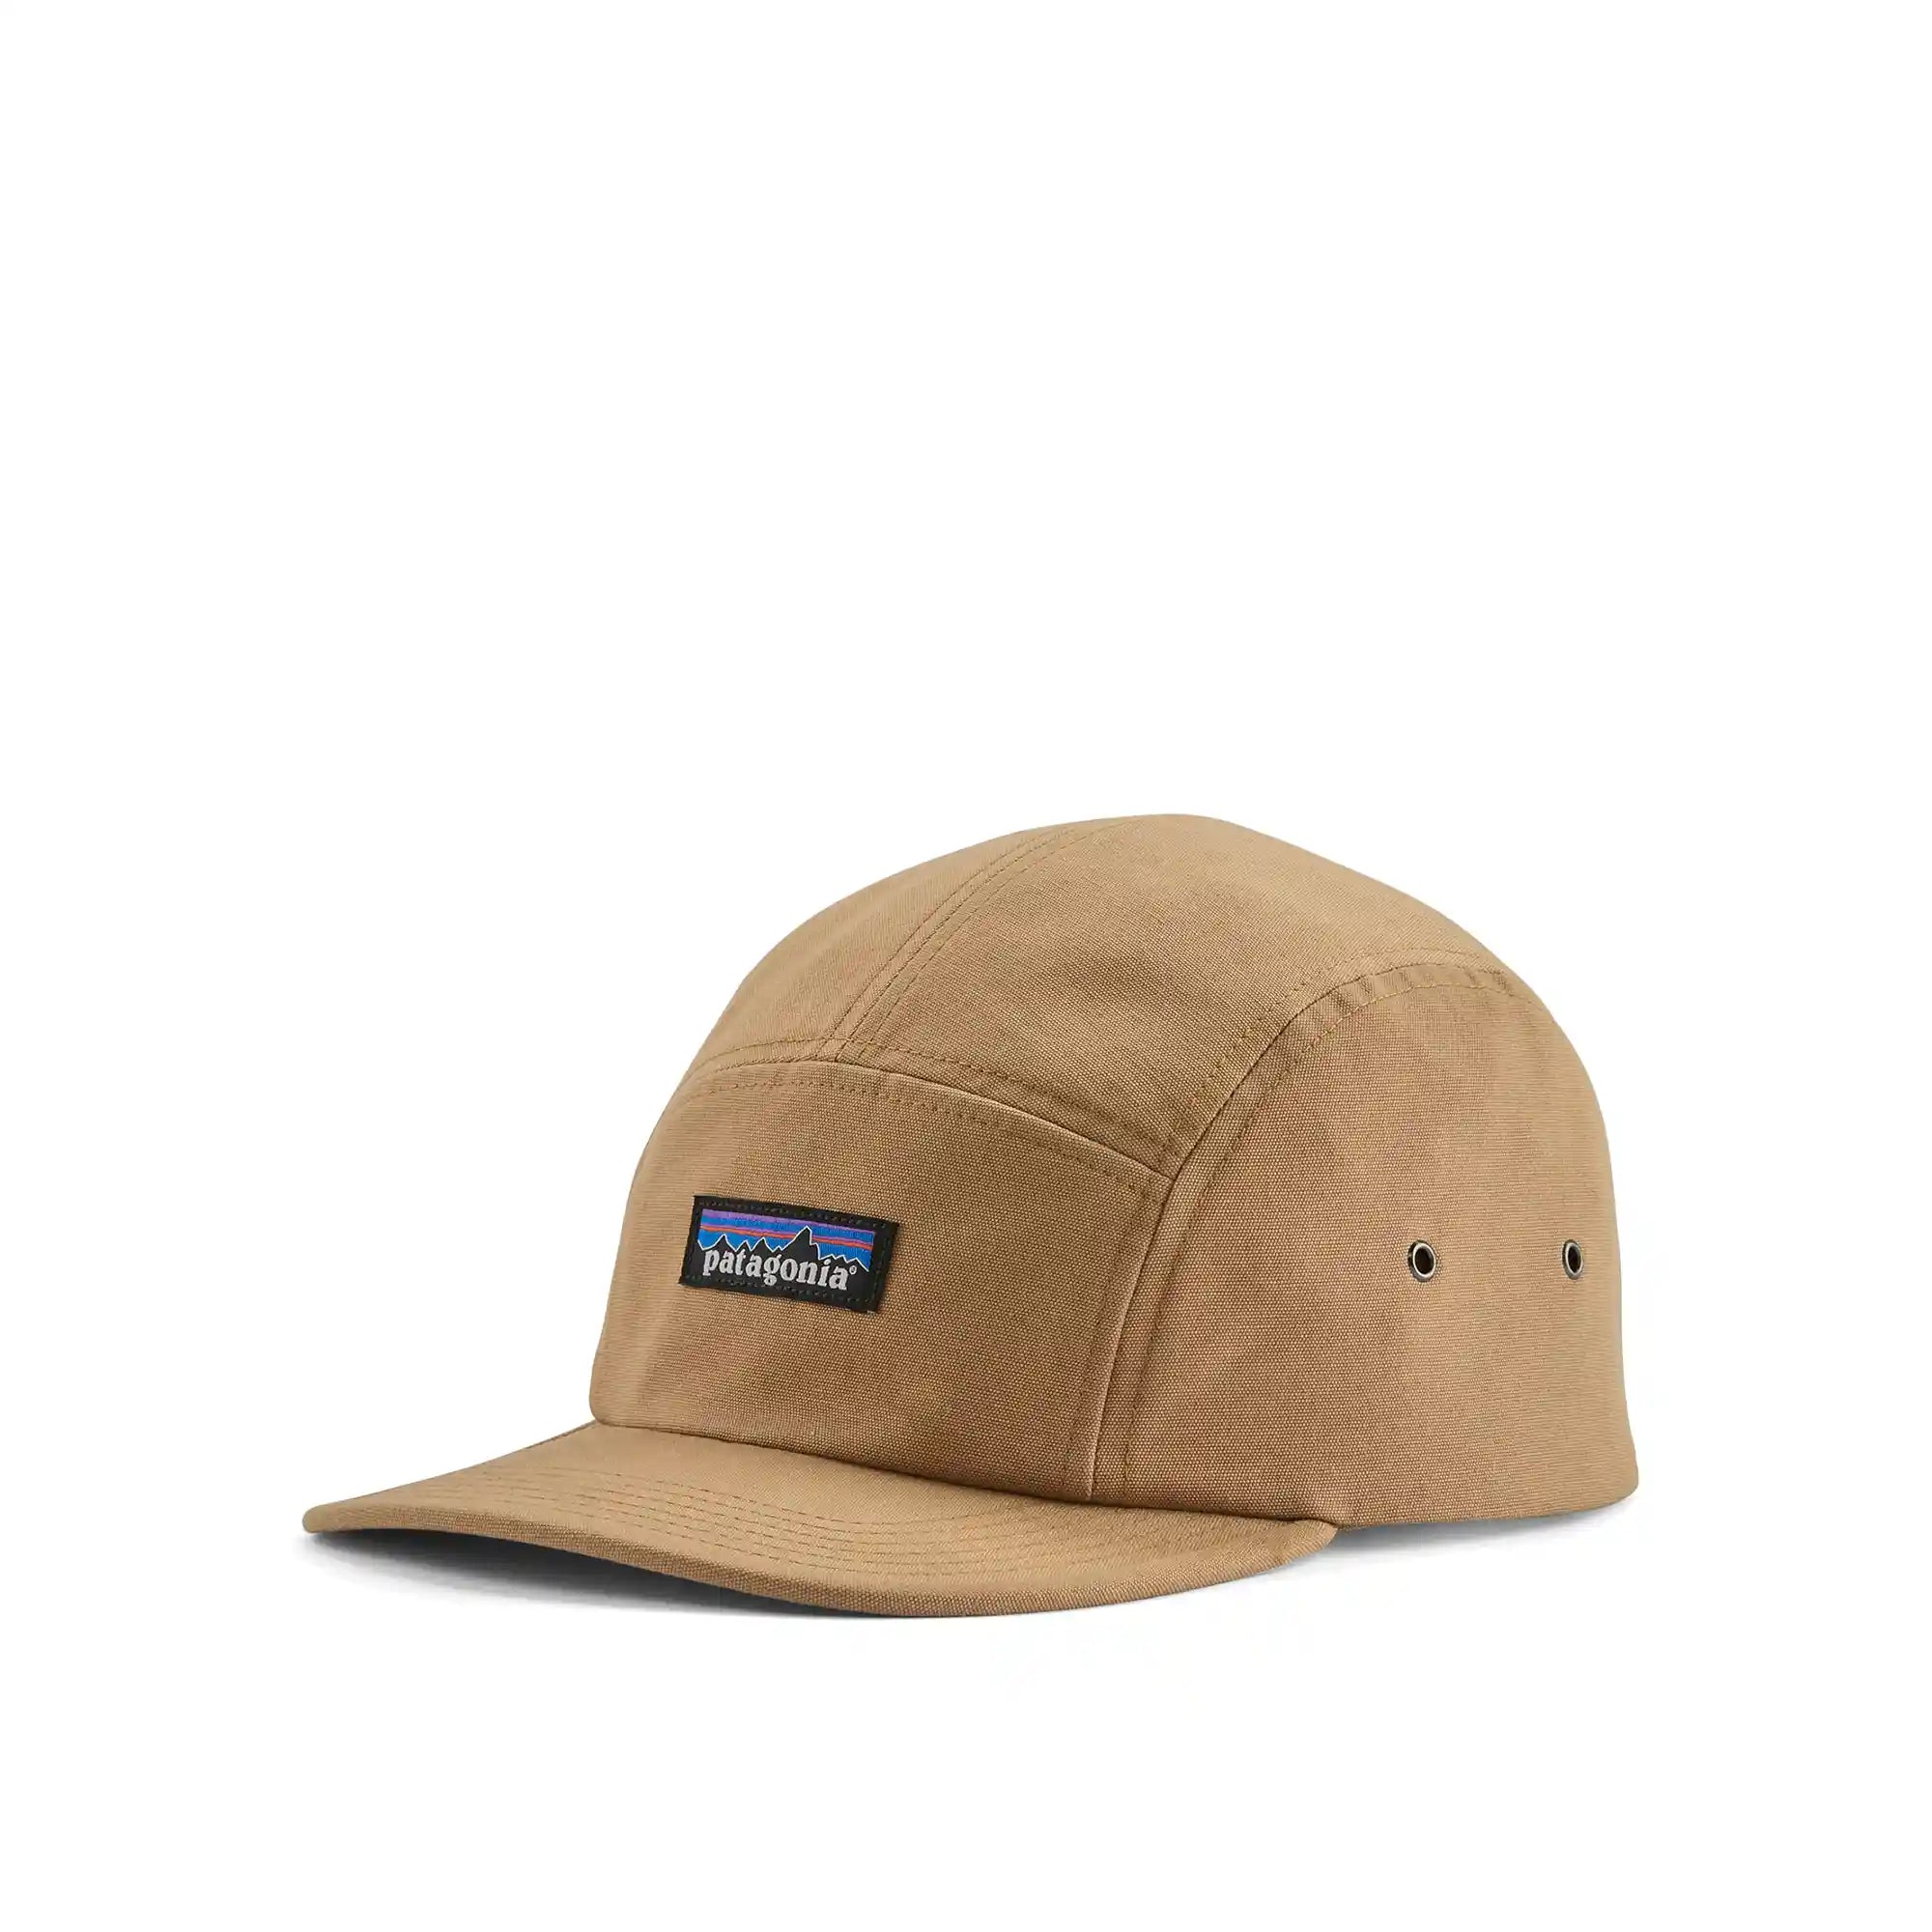 Patagonia Maclure Hat, Forge Mark Crest: Oar Tan – Norwood